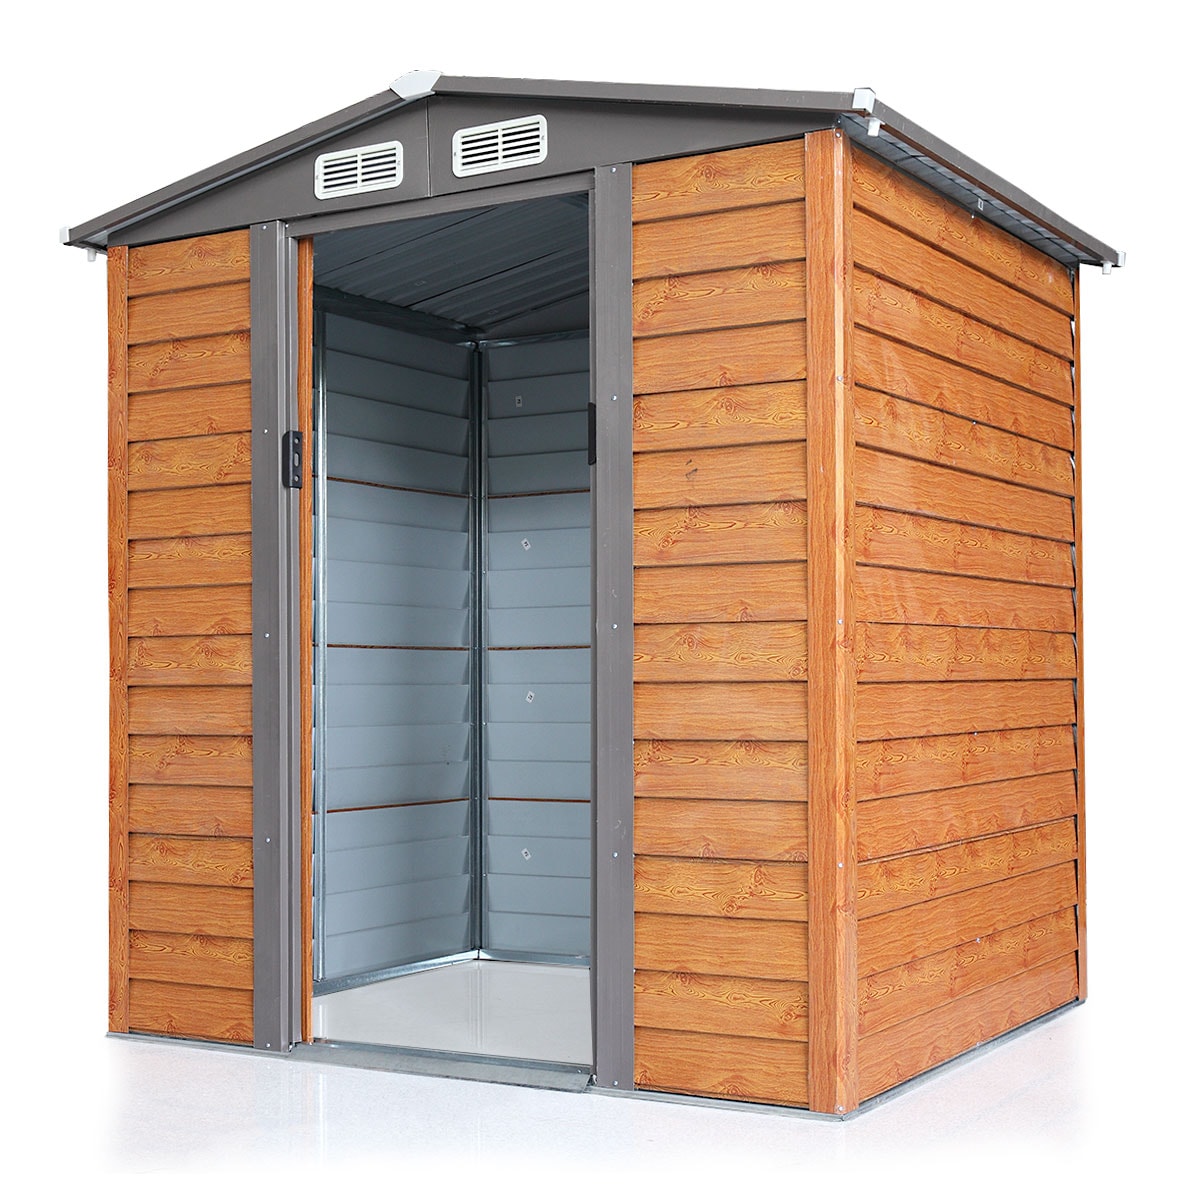 Jaxpety Outdoor Storage Shed 5 X 6 Ft, 6 Ft Garage Door For Shed